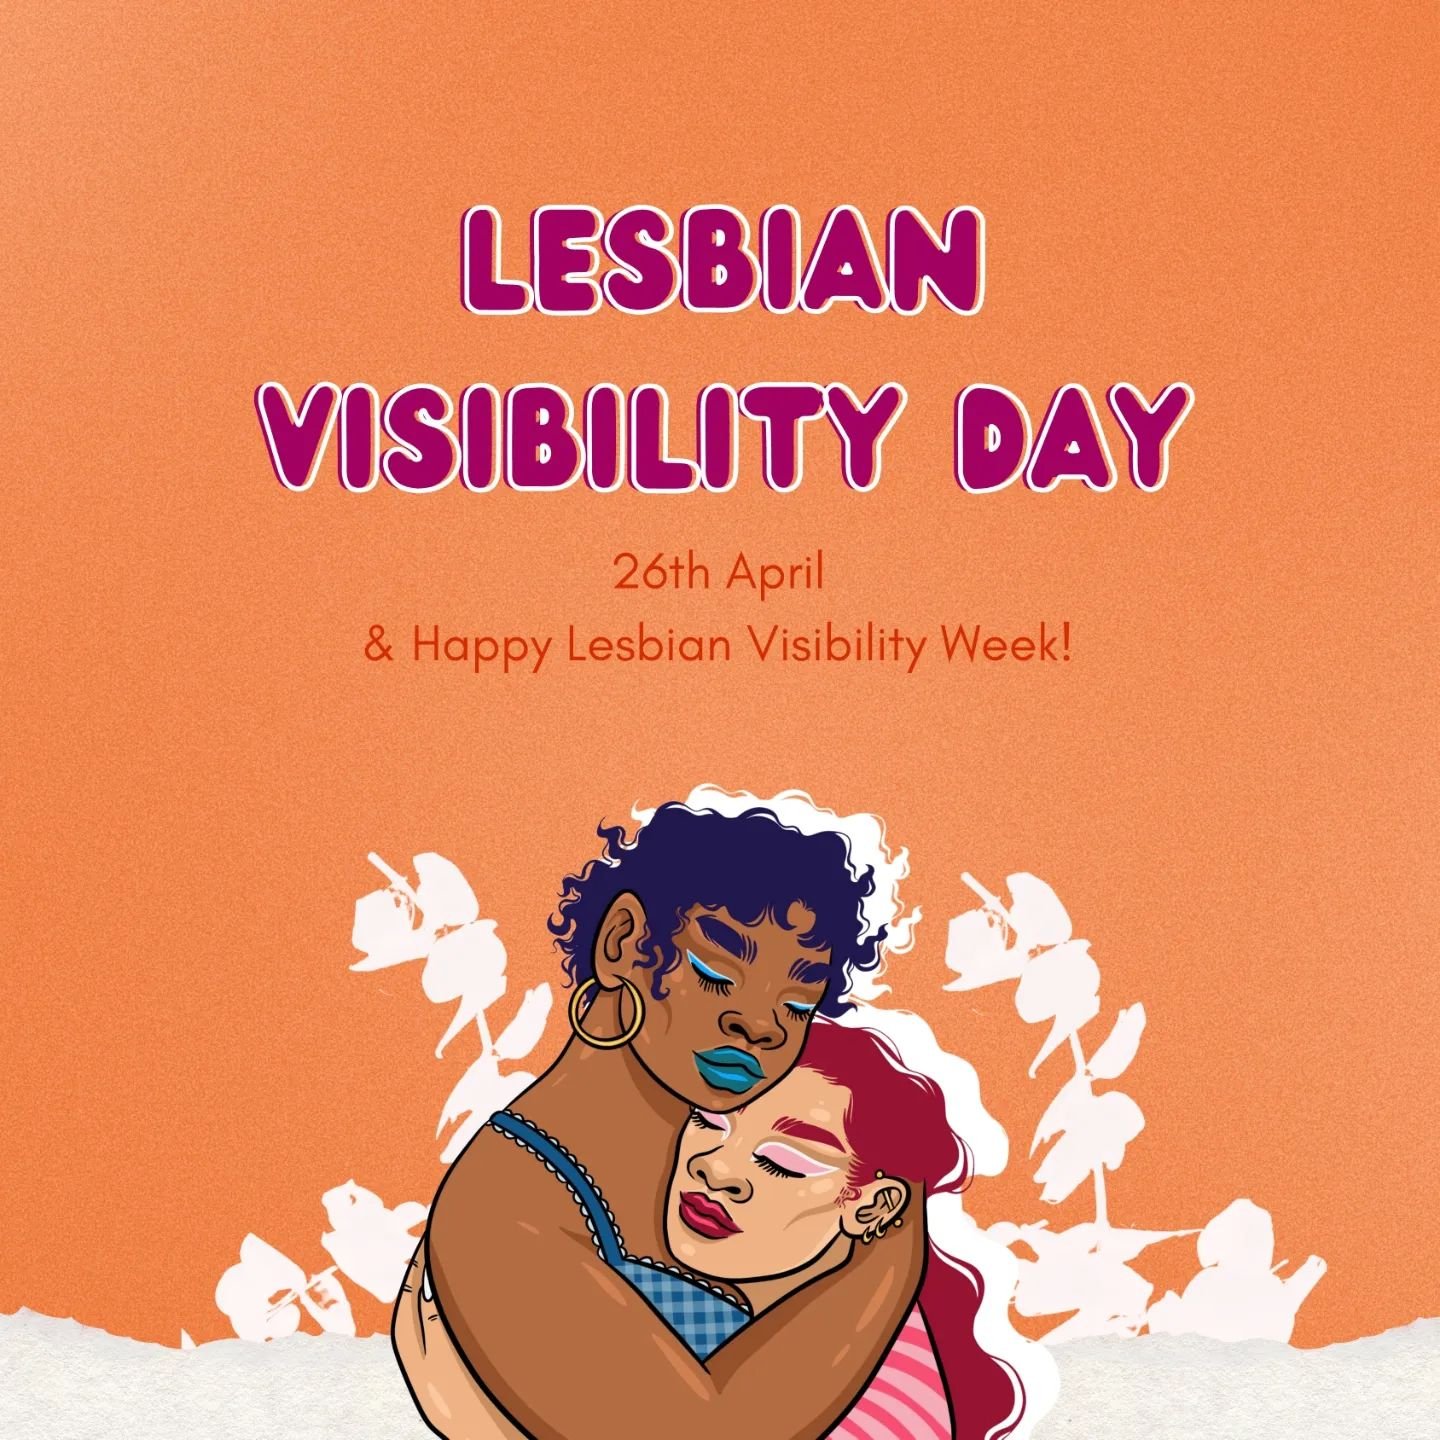 Happy lesbian visibility day &amp; week!! 

Lesbian Visibility Week celebrates the diverse experiences, identities, and contributions of lesbian individuals within the LGBTQ+ community. Today we also recognize the unique struggles faced by our lesbia